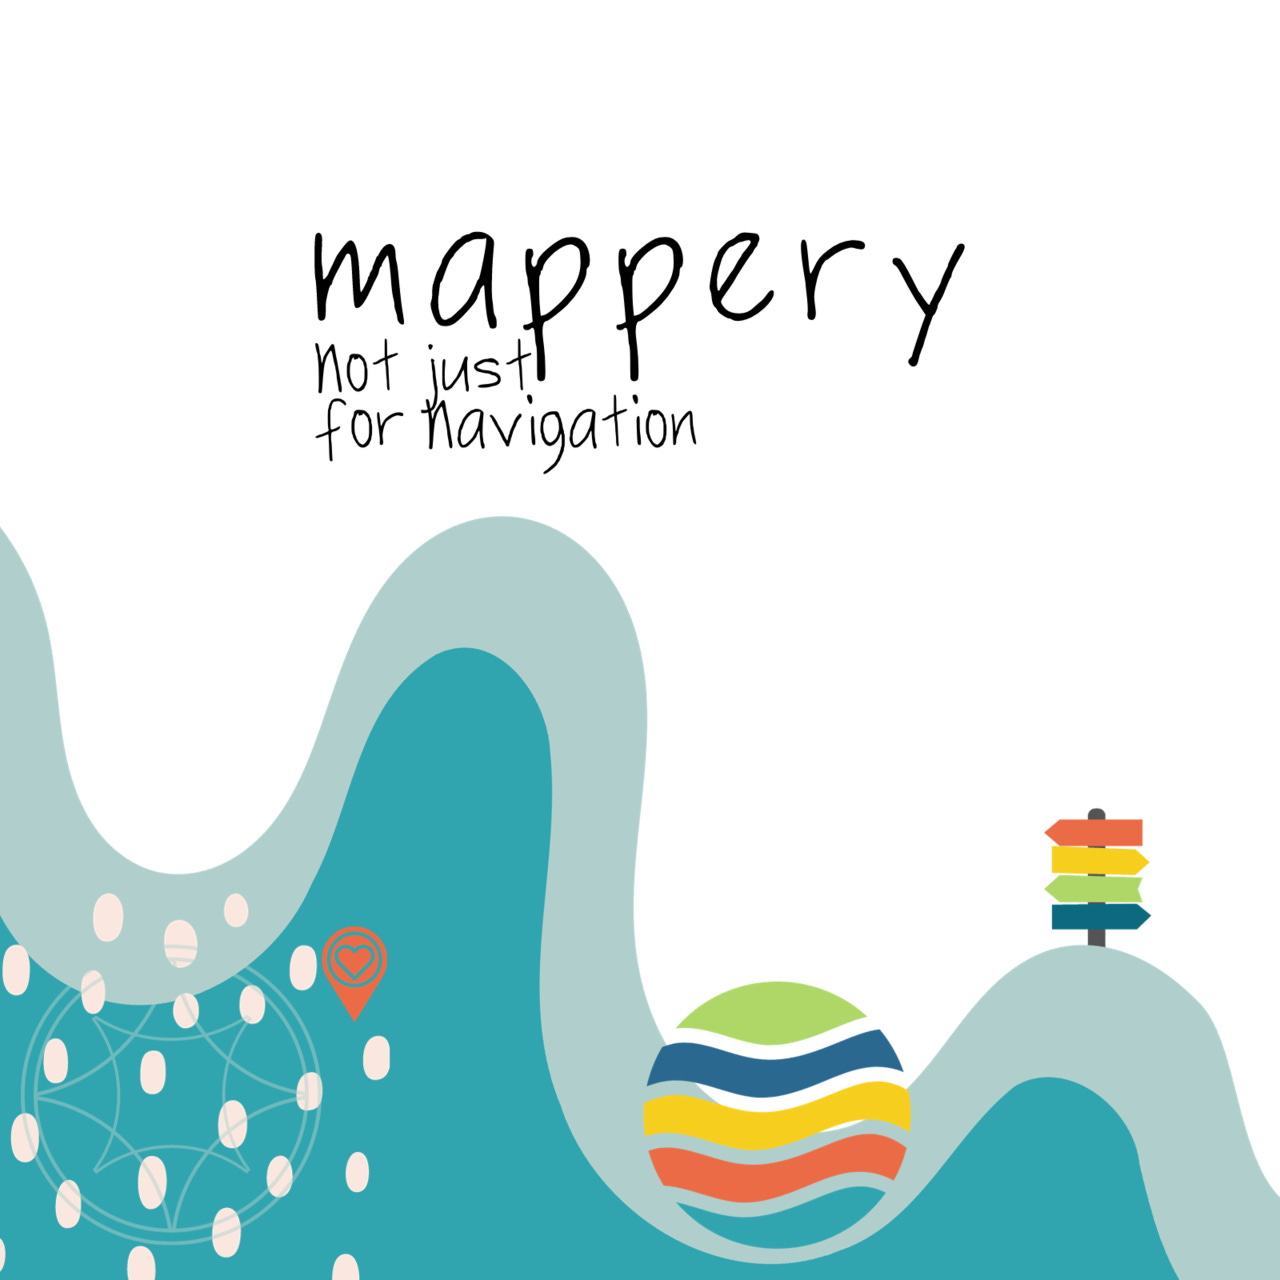 Mappery: Not just for Navigation